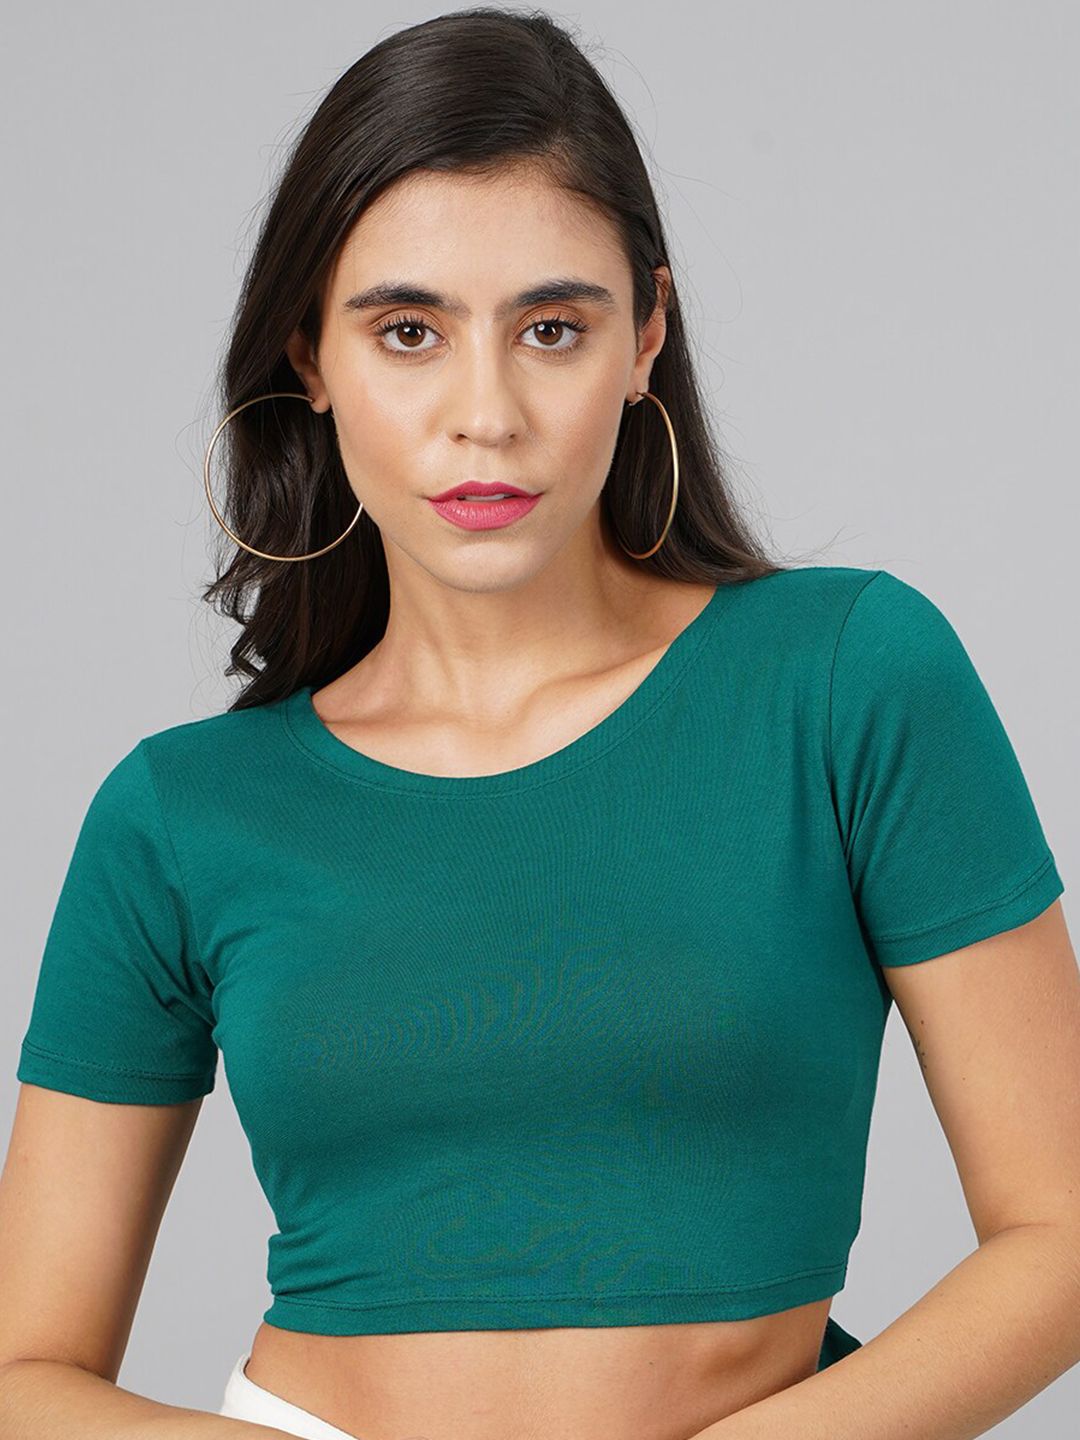 Cation Solid Styled Back Crop Top Price in India